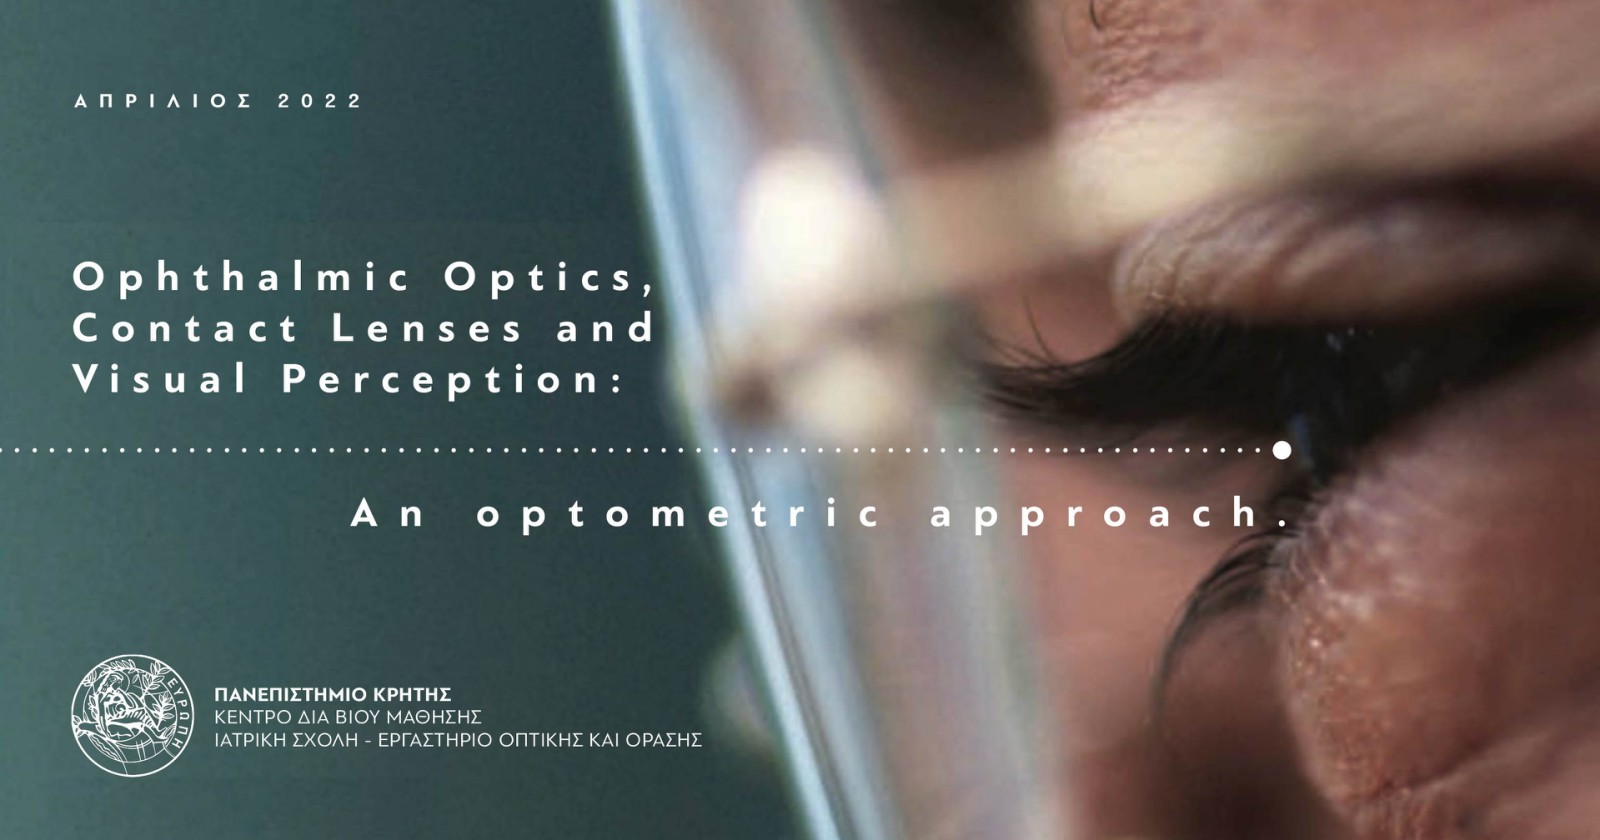 Ophthalmic Optics, Contact Lenses and Visual Perception: an optometric approach